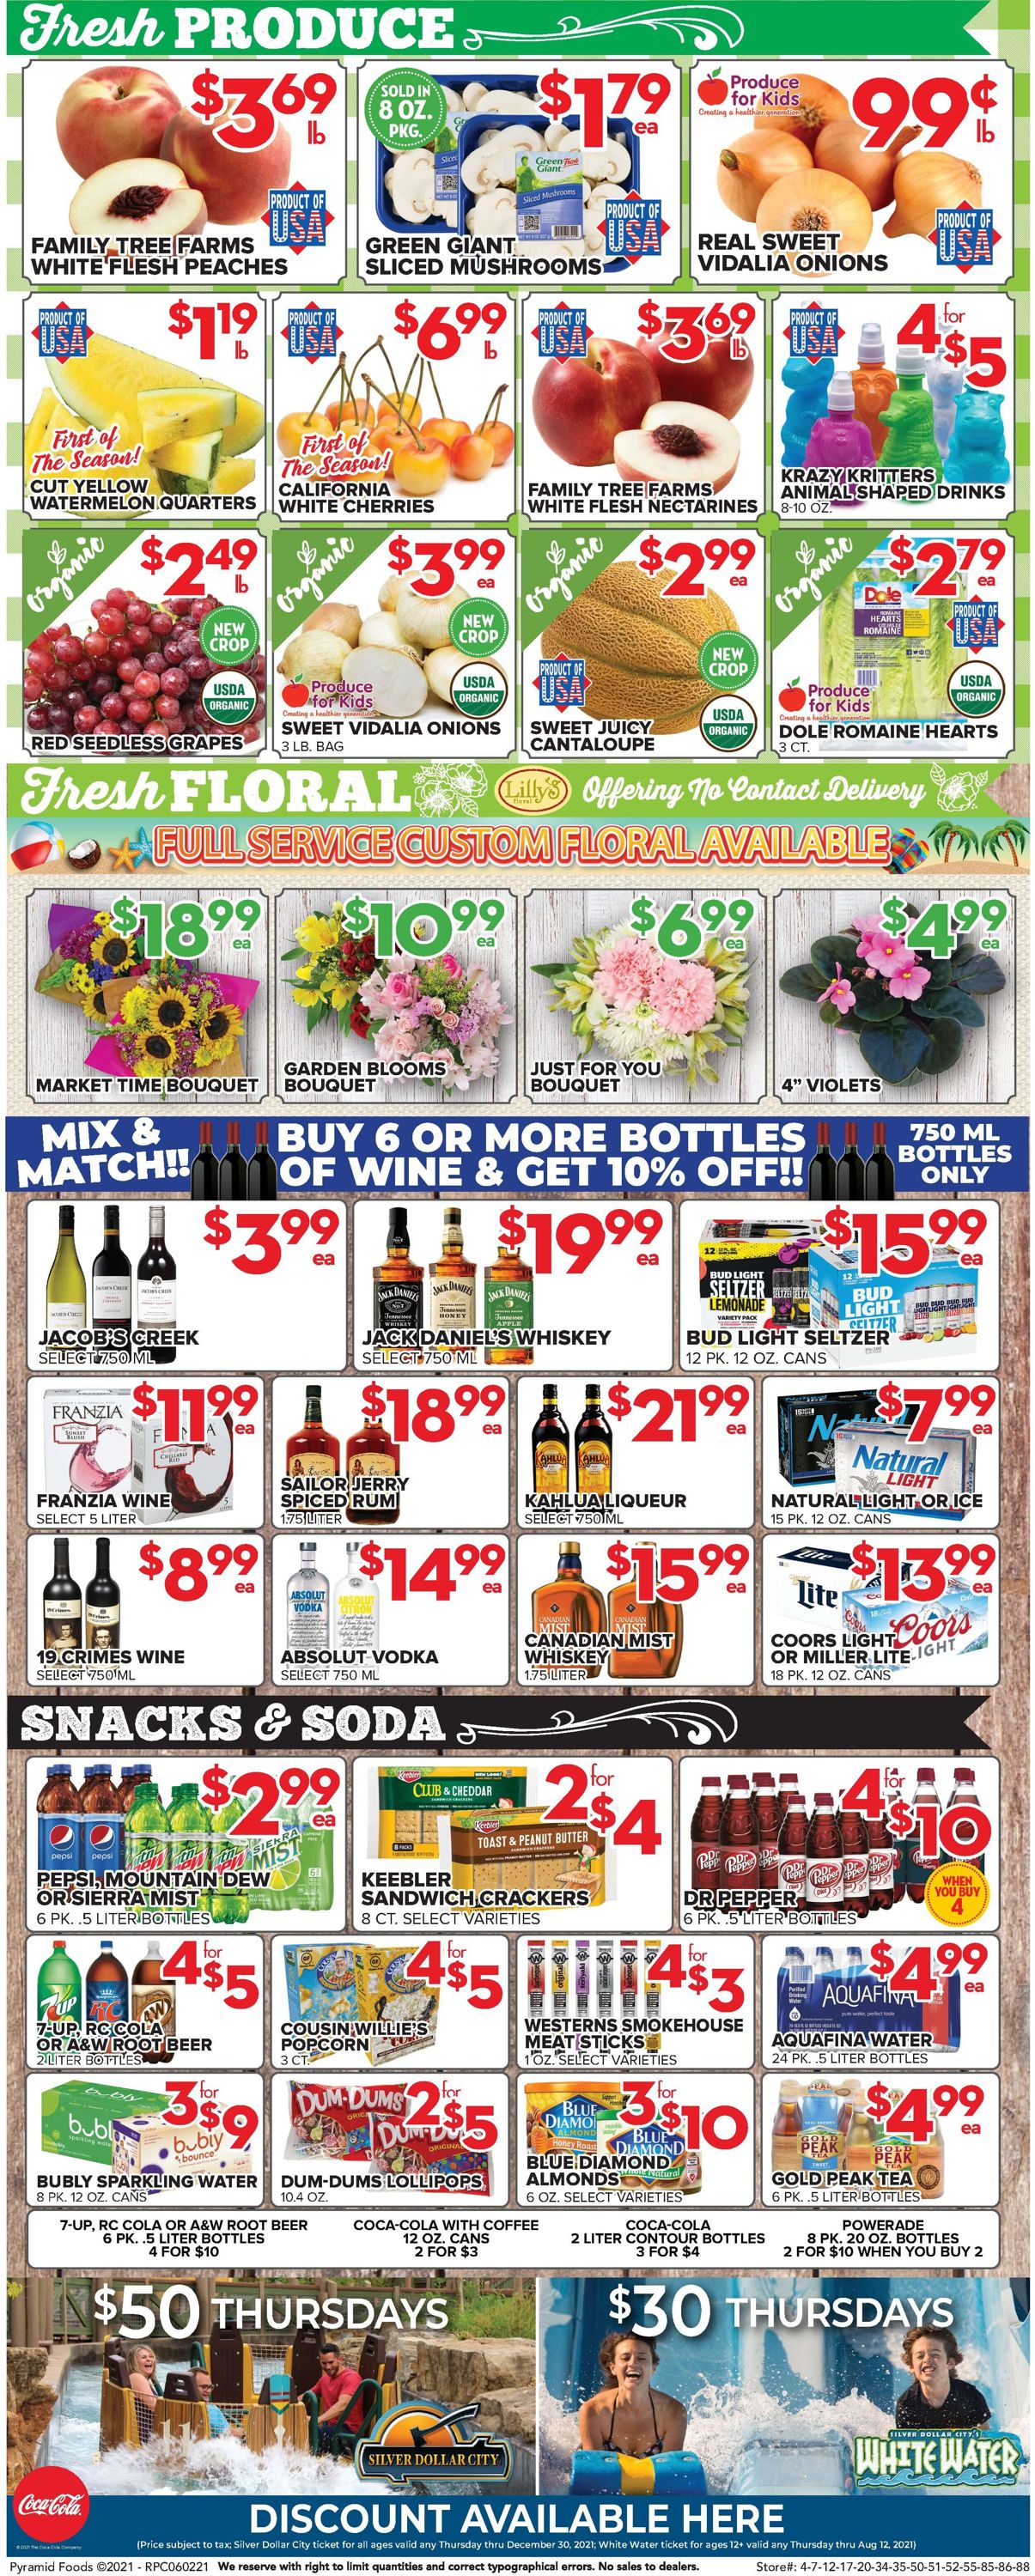 Price Cutter Weekly Ad Circular - valid 06/02-06/08/2021 (Page 4)